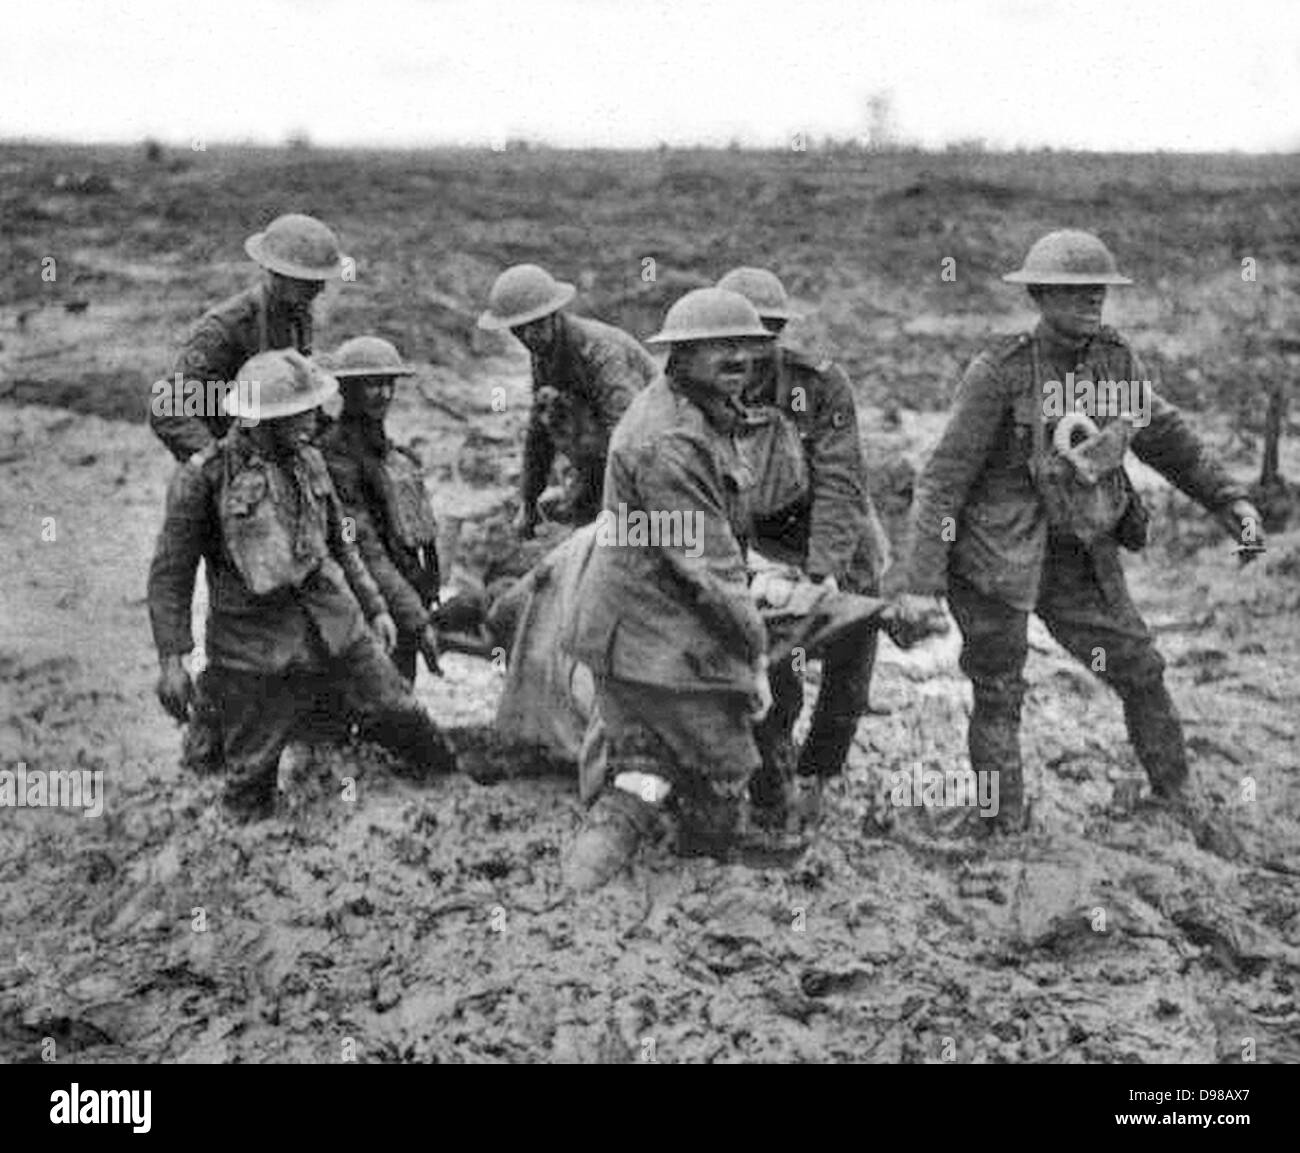 Stretcher bearers Passchendaele August 1917.  Stretcher bearers struggling through the mud near Boesinghe, August 1, 1917, during the Battle of Pilckem Ridge (part of the Third Battle of Ypres). Stock Photo